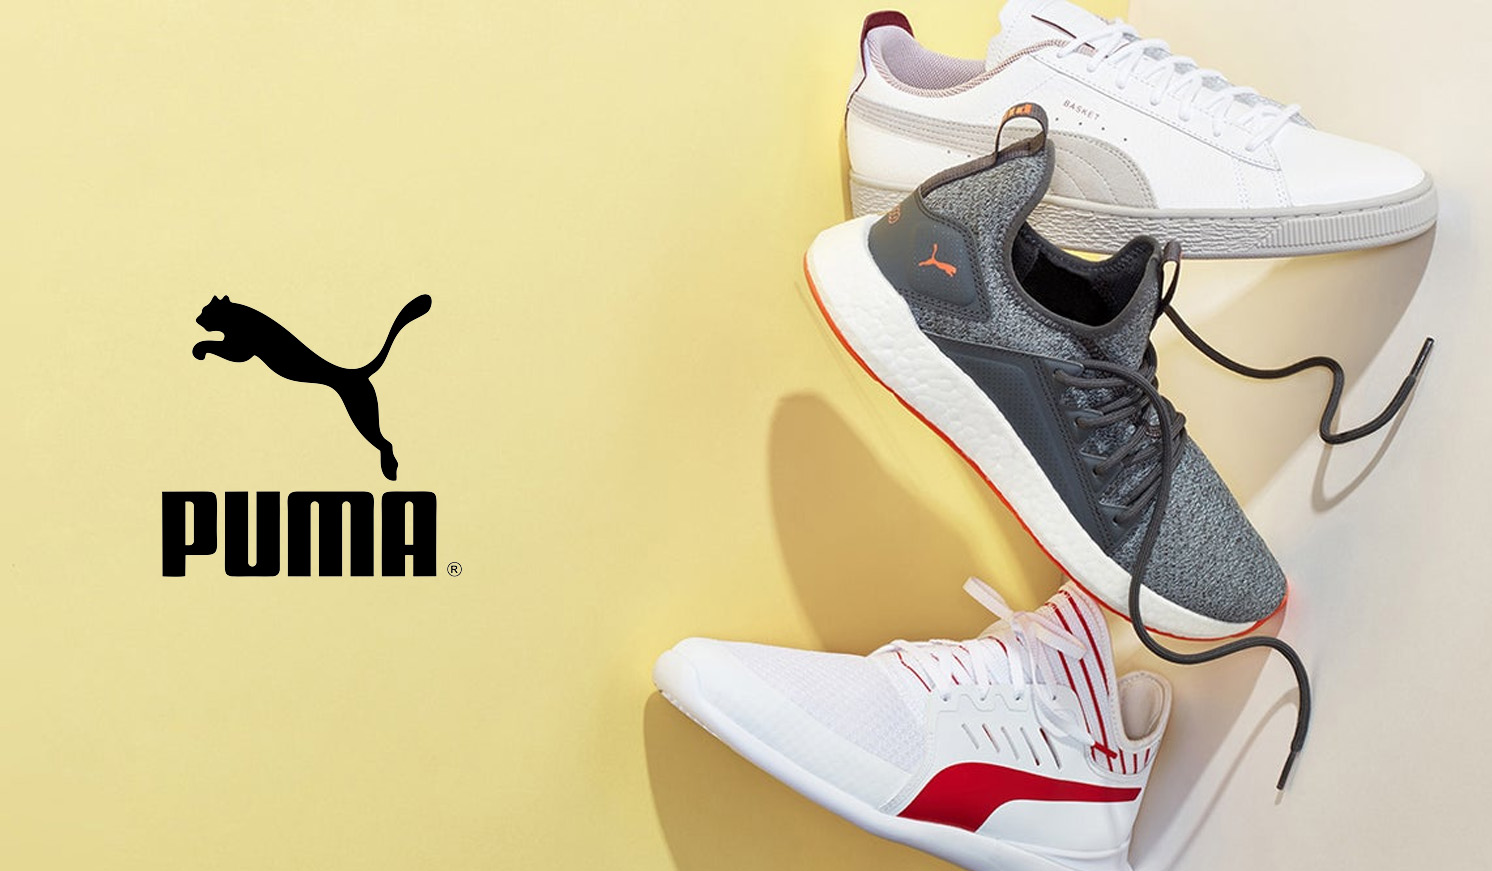 PUMA shoes for men and women from just 